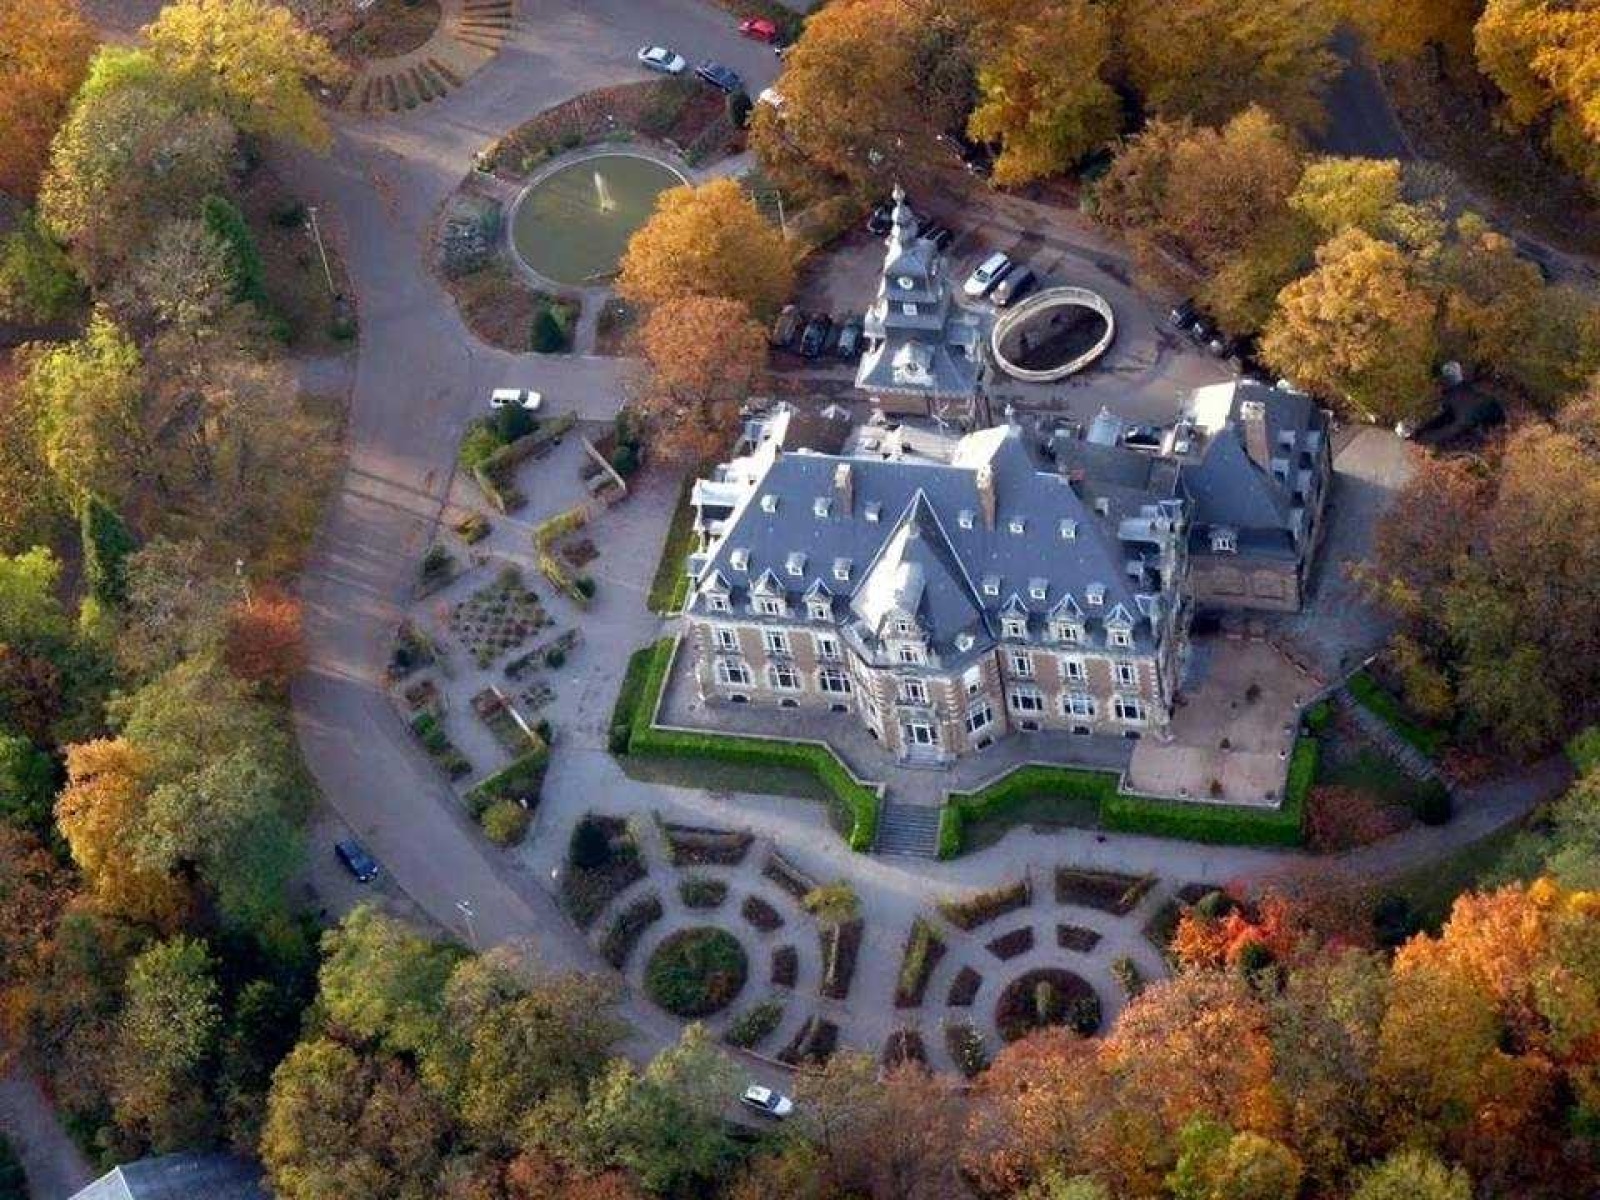 Aerial view of the Château de Namur with its tree planted surroundings